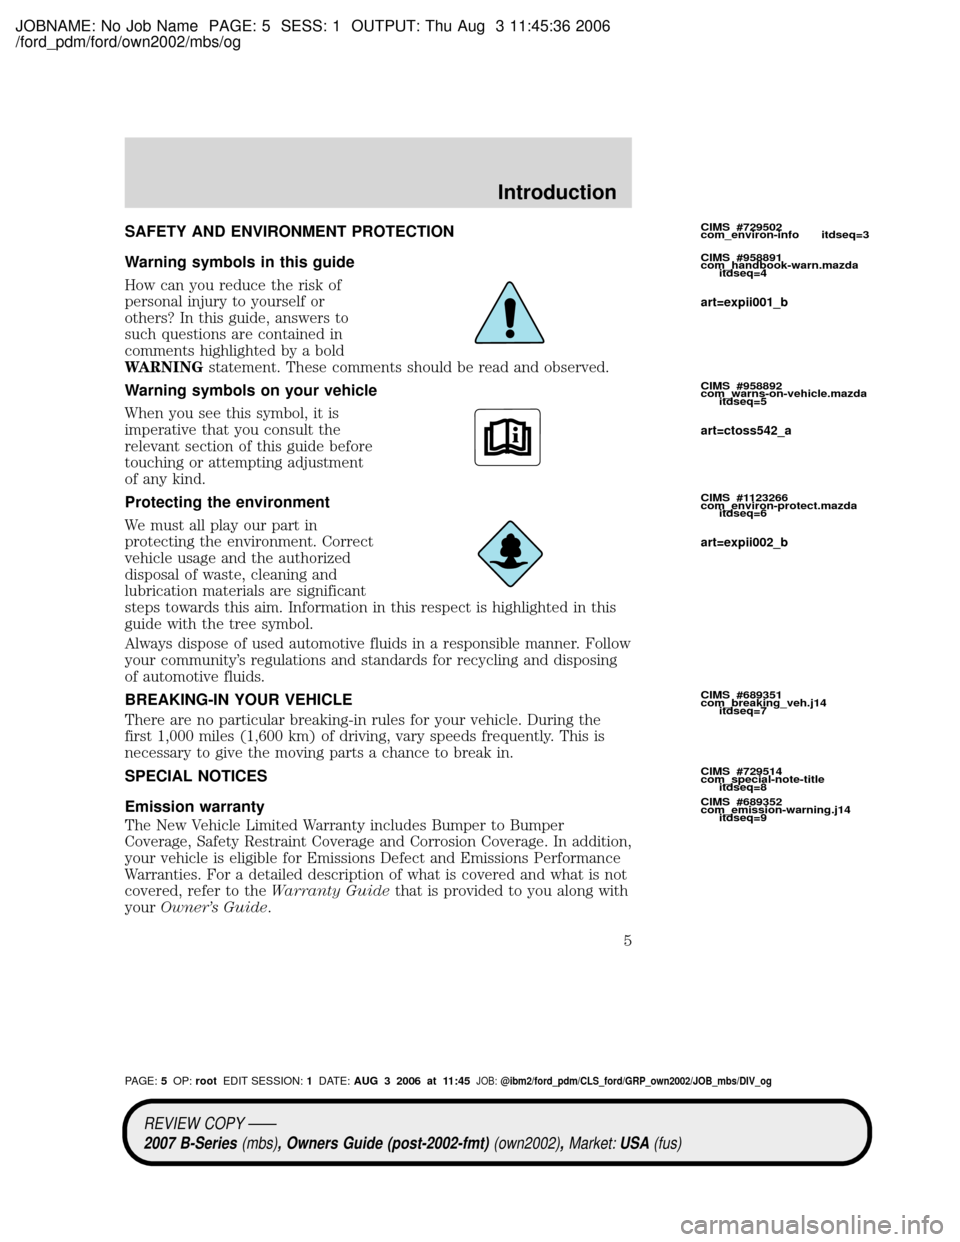 MAZDA MODEL B4000 TRUCK 2007  Owners Manual (in English) JOBNAME: No Job Name PAGE: 5 SESS: 1 OUTPUT: Thu Aug 3 11:45:36 2006
/ford_pdm/ford/own2002/mbs/og
SAFETY AND ENVIRONMENT PROTECTION
Warning symbols in this guide
How can you reduce the risk of
person